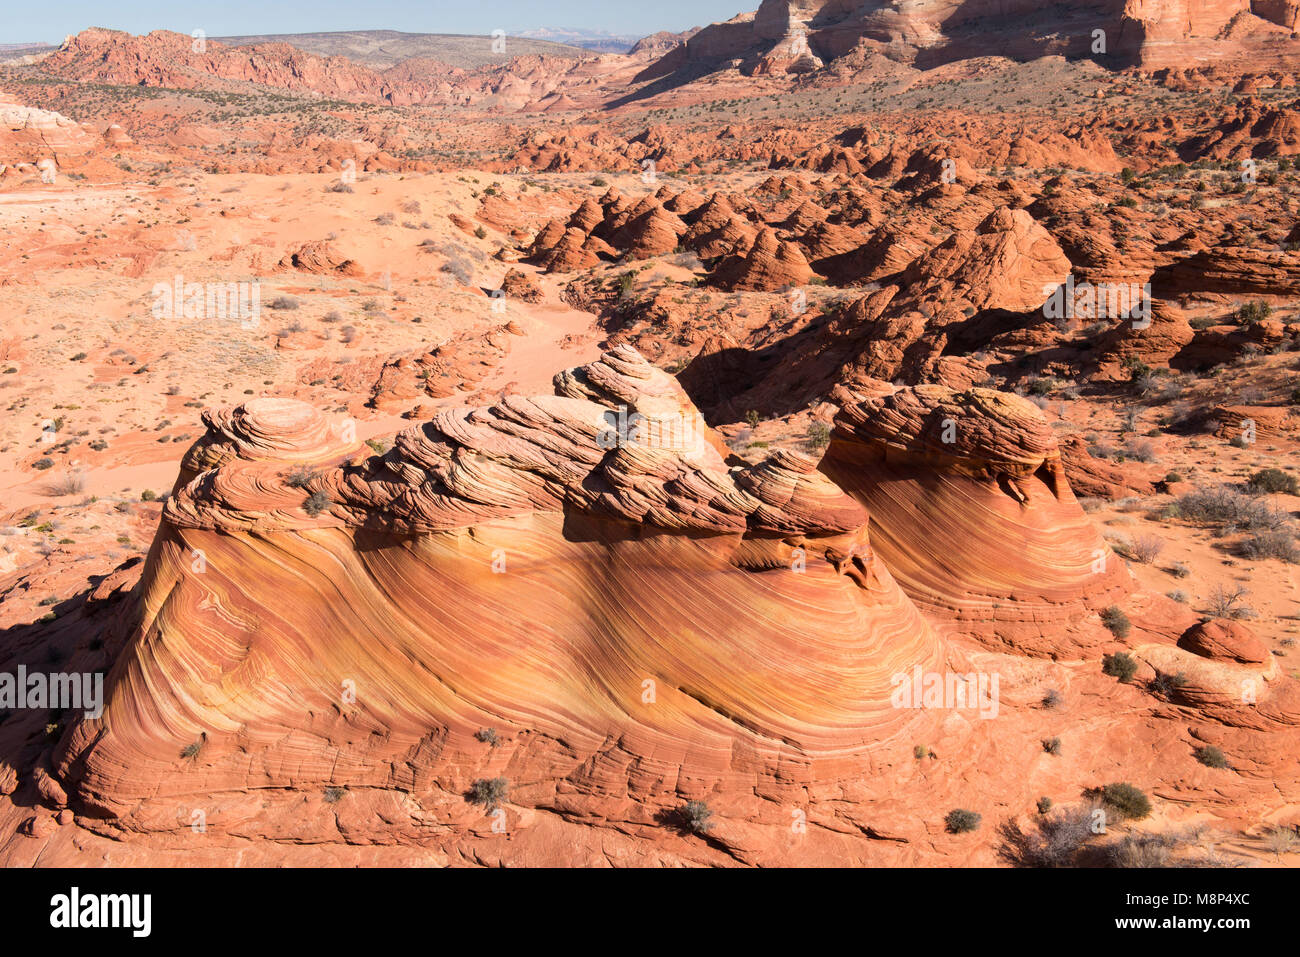 Rock formations in Coyote Buttes part of the Vermilion Cliffs National Monument in Arizona. Stock Photo